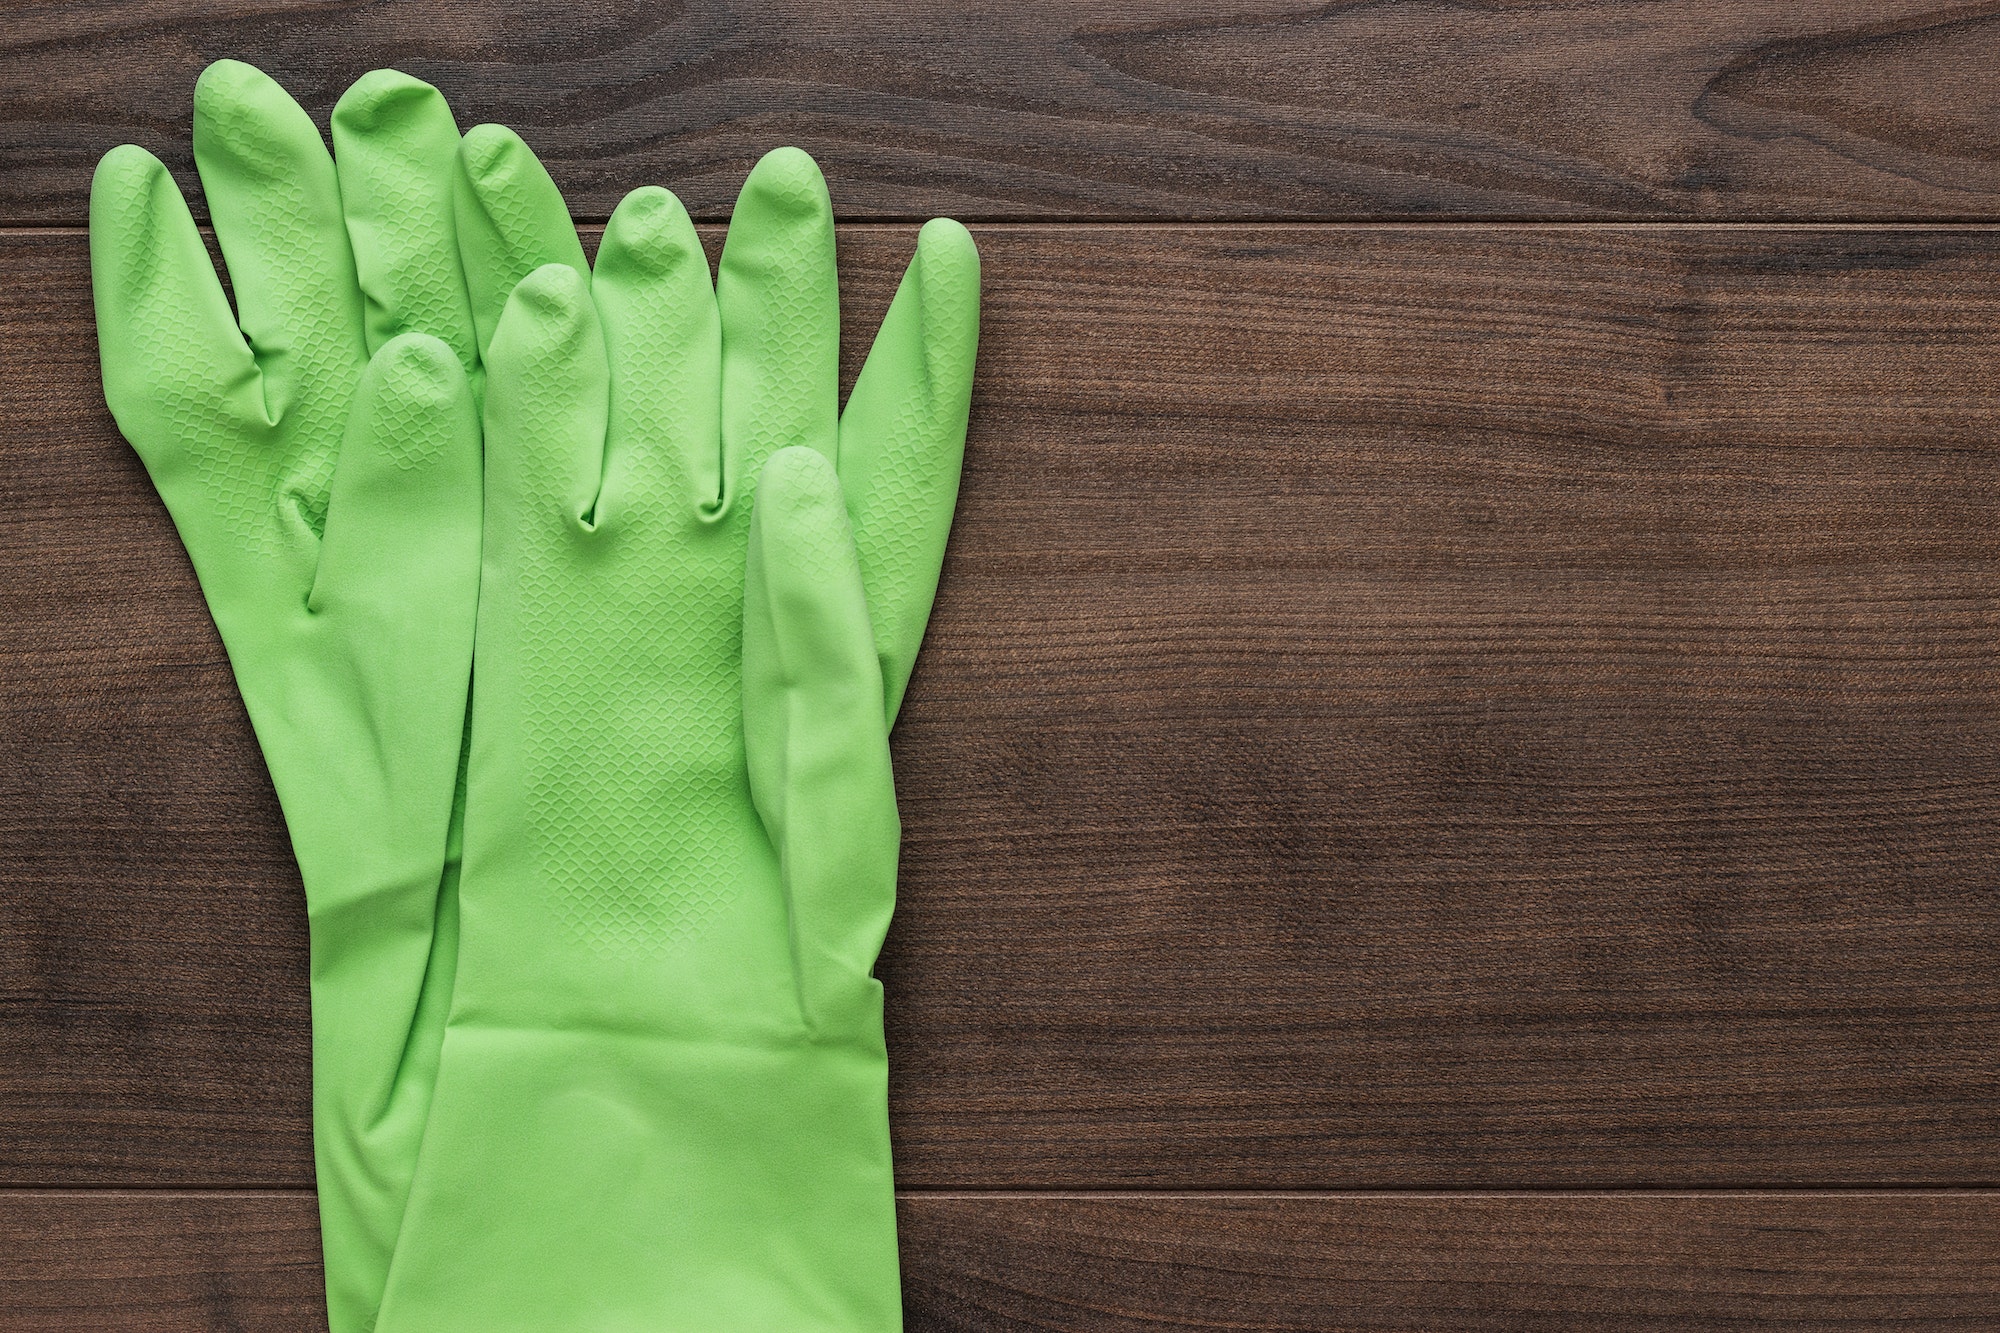 Eco-Friendly Cleaning: A Guide to Safe and Effective DIY Cleaners